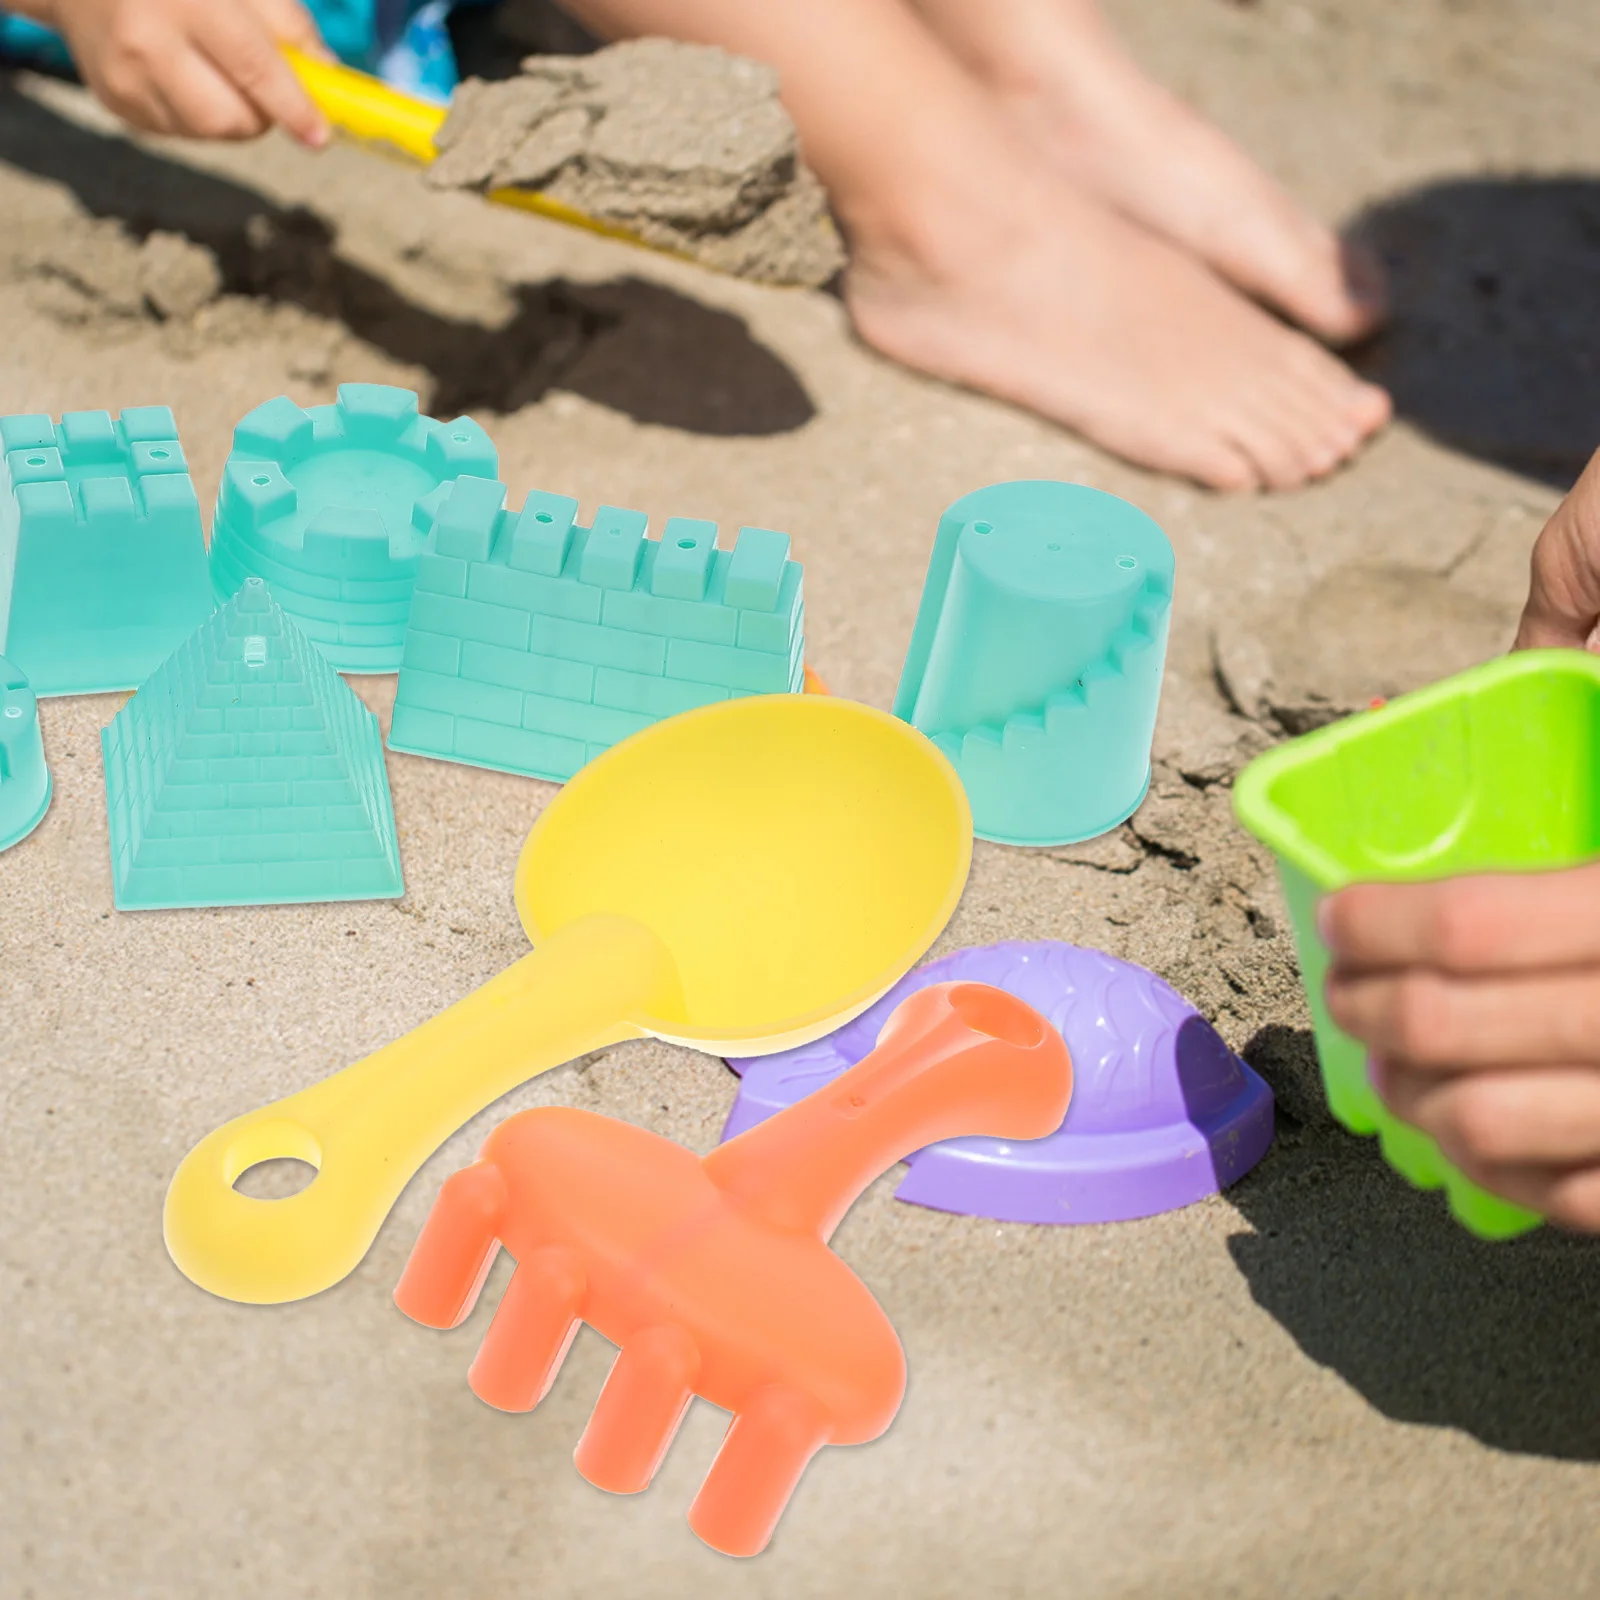 

Sand Beach S Setcastle Play Kids Tool Sandbox Mold Kit Scoop Molds Dinosaur Playing Outdoor Building Tools Recognition